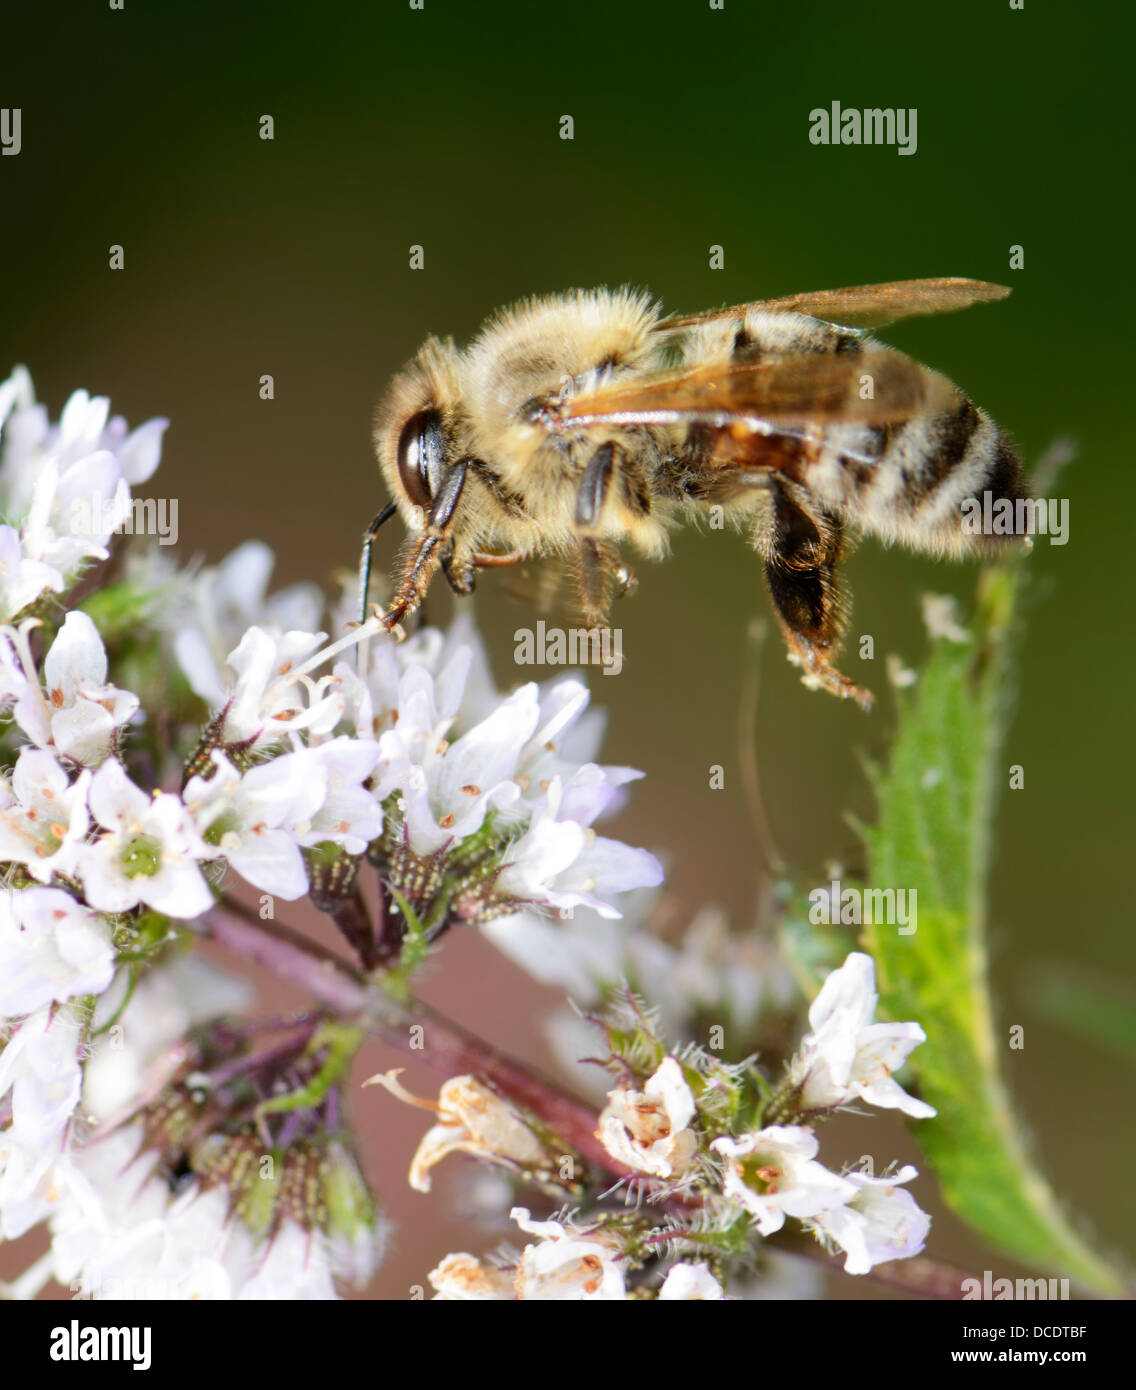 Pollination - Honeybee at a white flower Stock Photo